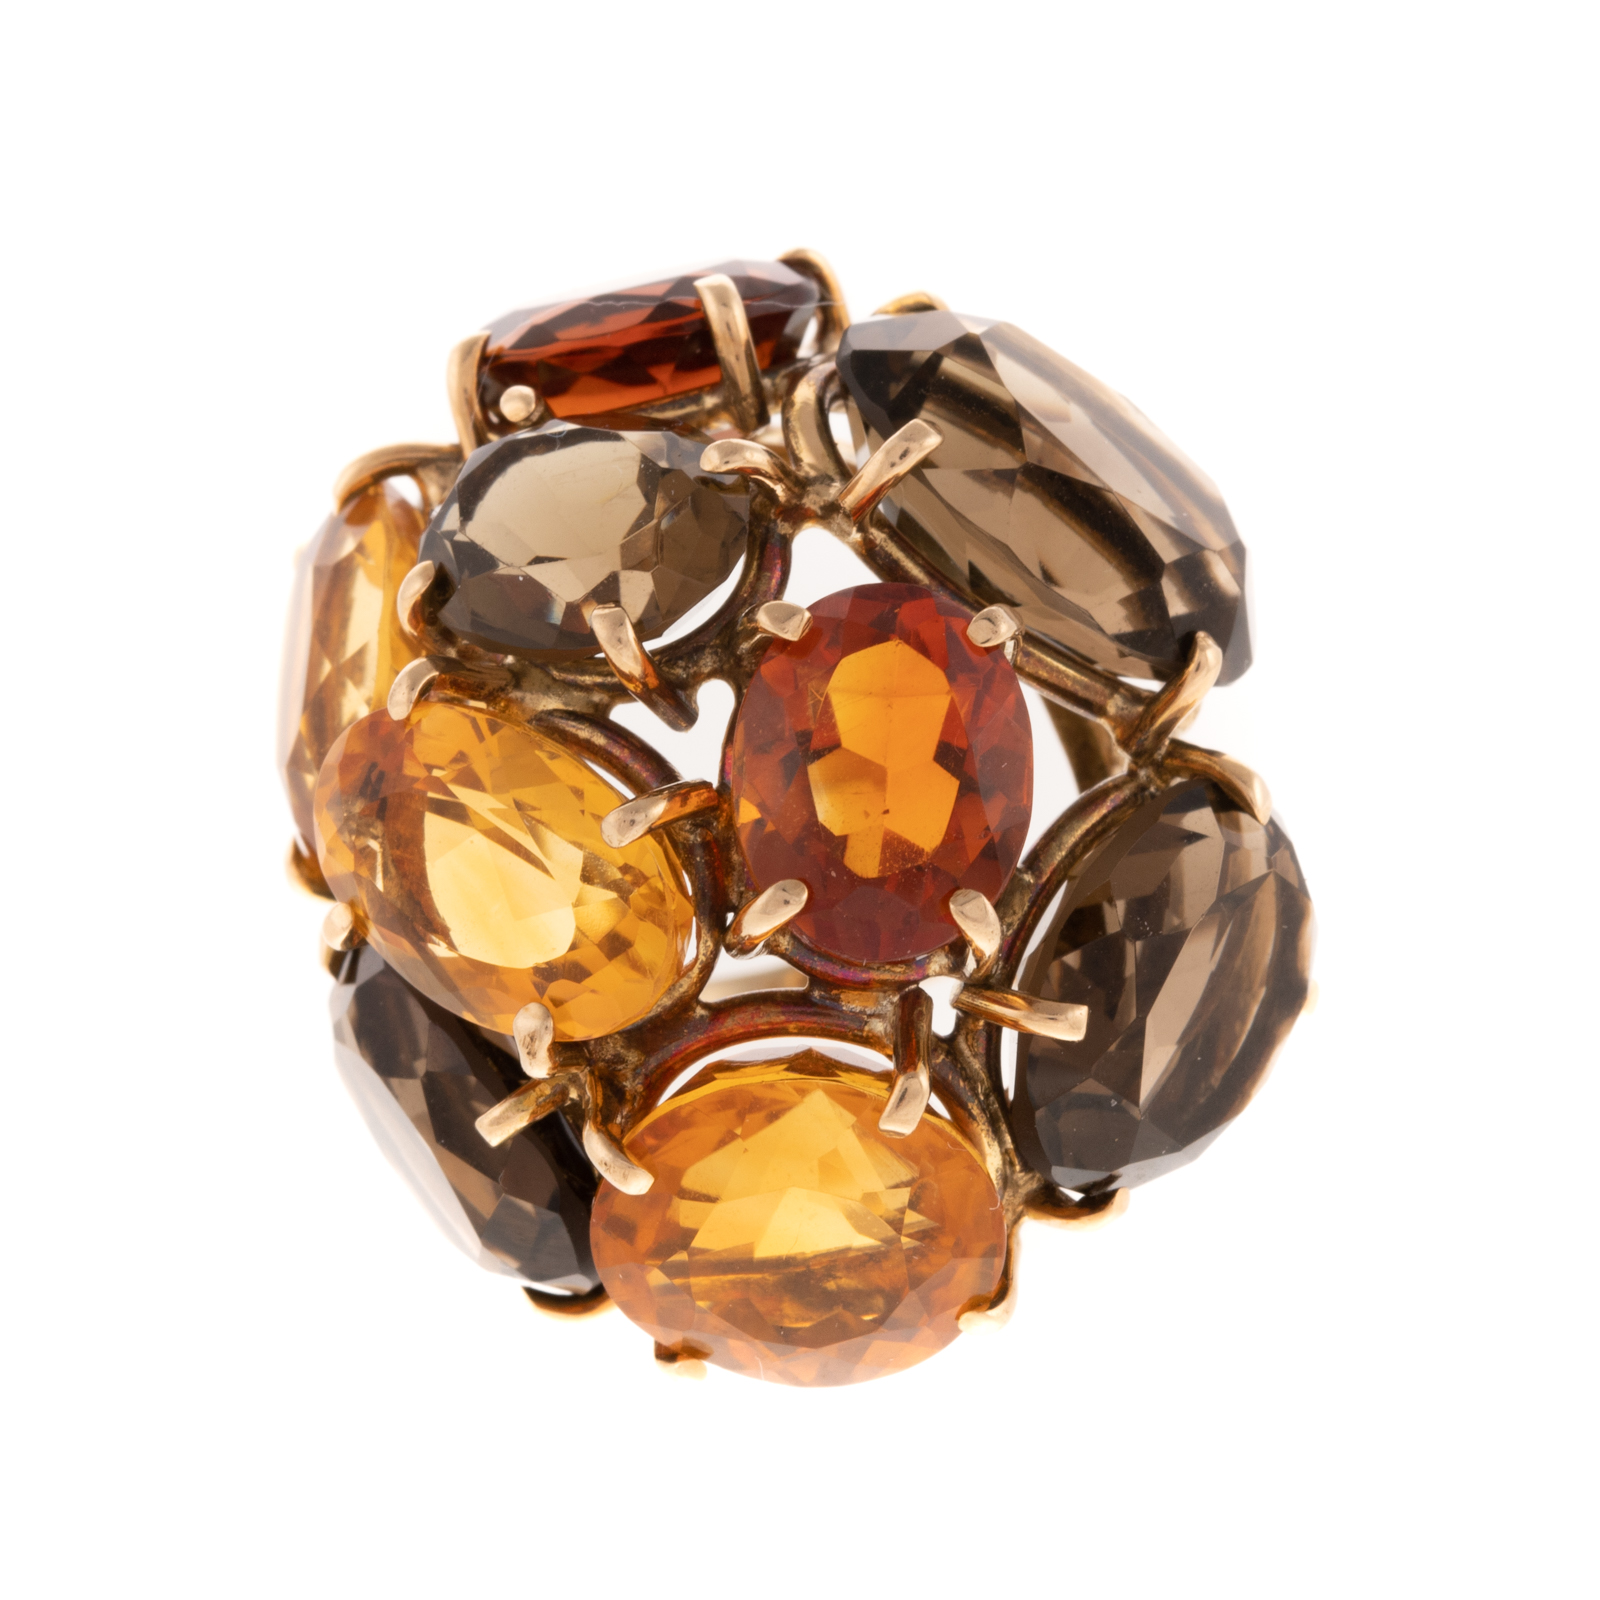 A BOLD CITRINE CLUSTER RING IN